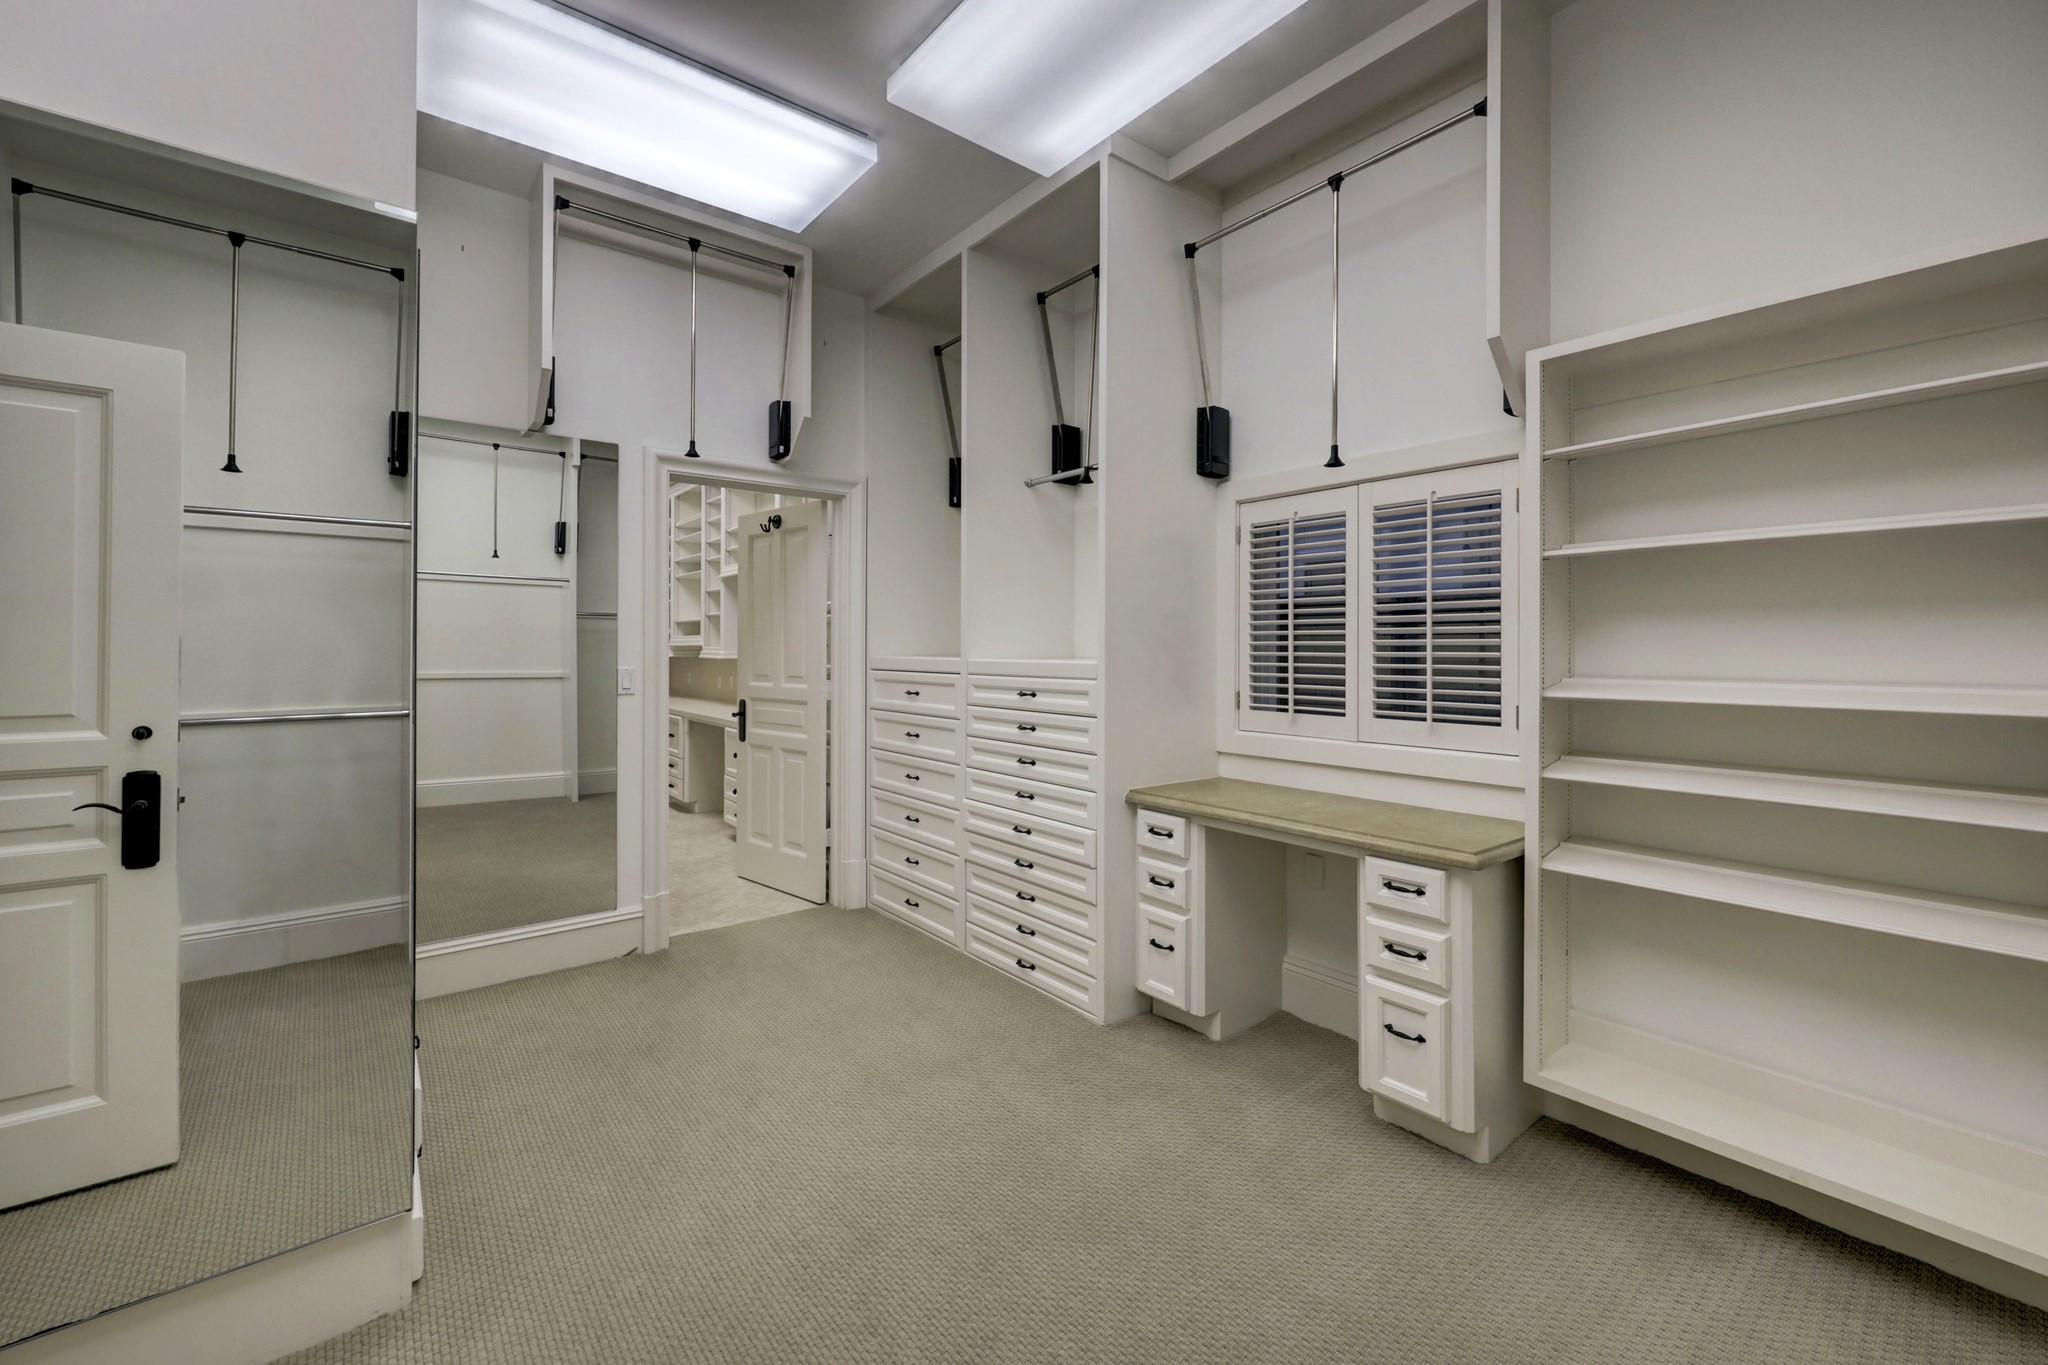 WOWZA!  Now THIS is a closet!  There are single, double and triple hanging rods with pull down capability, make-up vanity, full length mirror, ample shelves and access to the private home office between the two Primary closets.  Amazing storage.